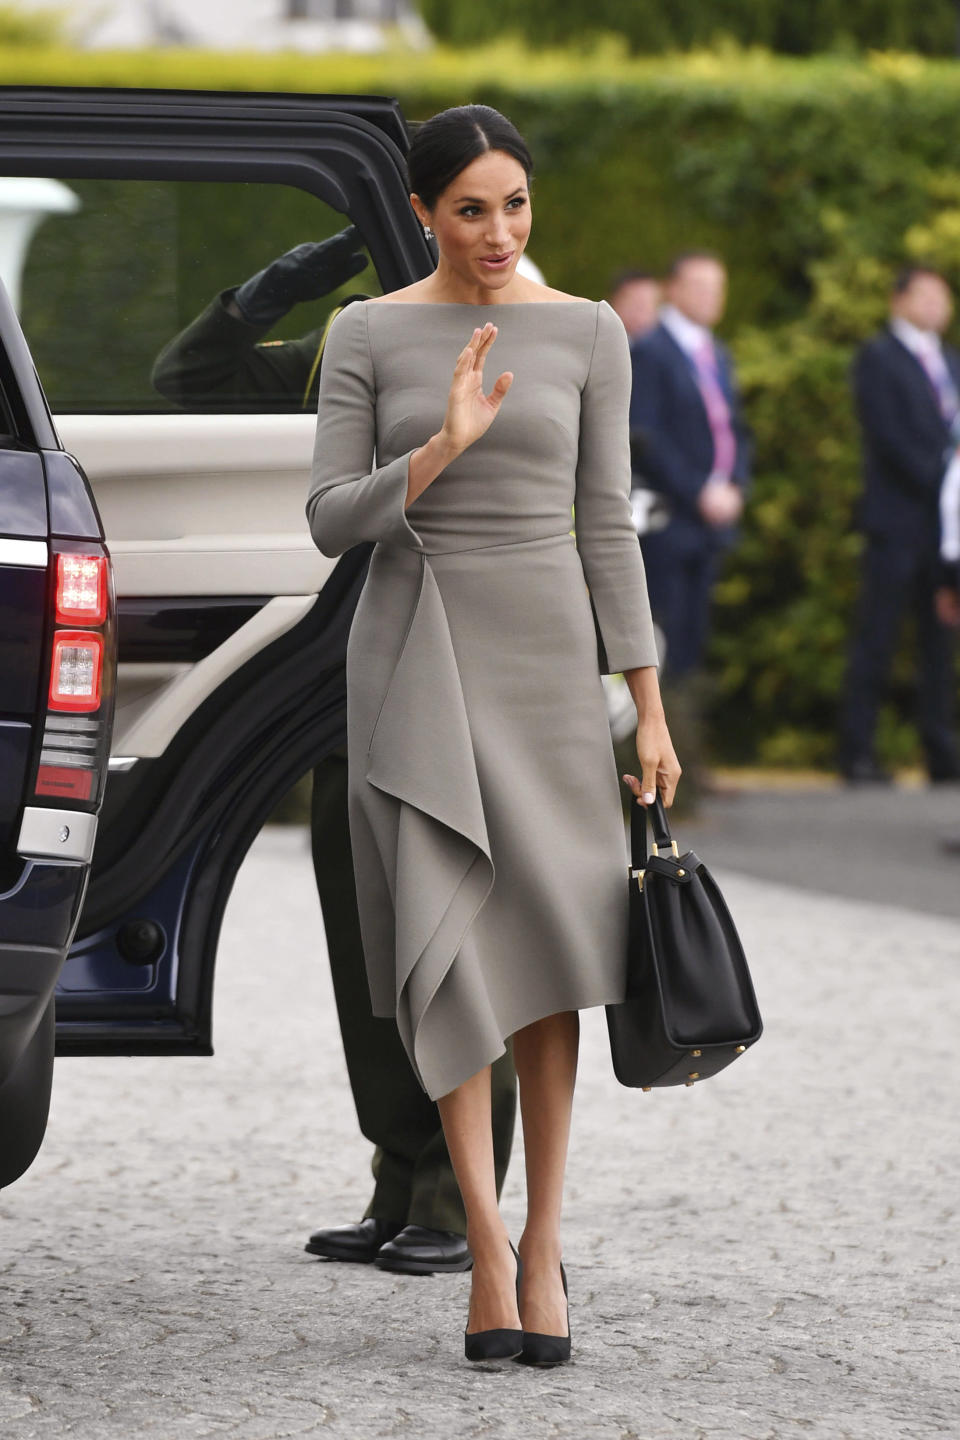 The Duchess of Sussex wore her Roland Mouret on Wednesday. (Photo: Joe Giddens/PA via AP)